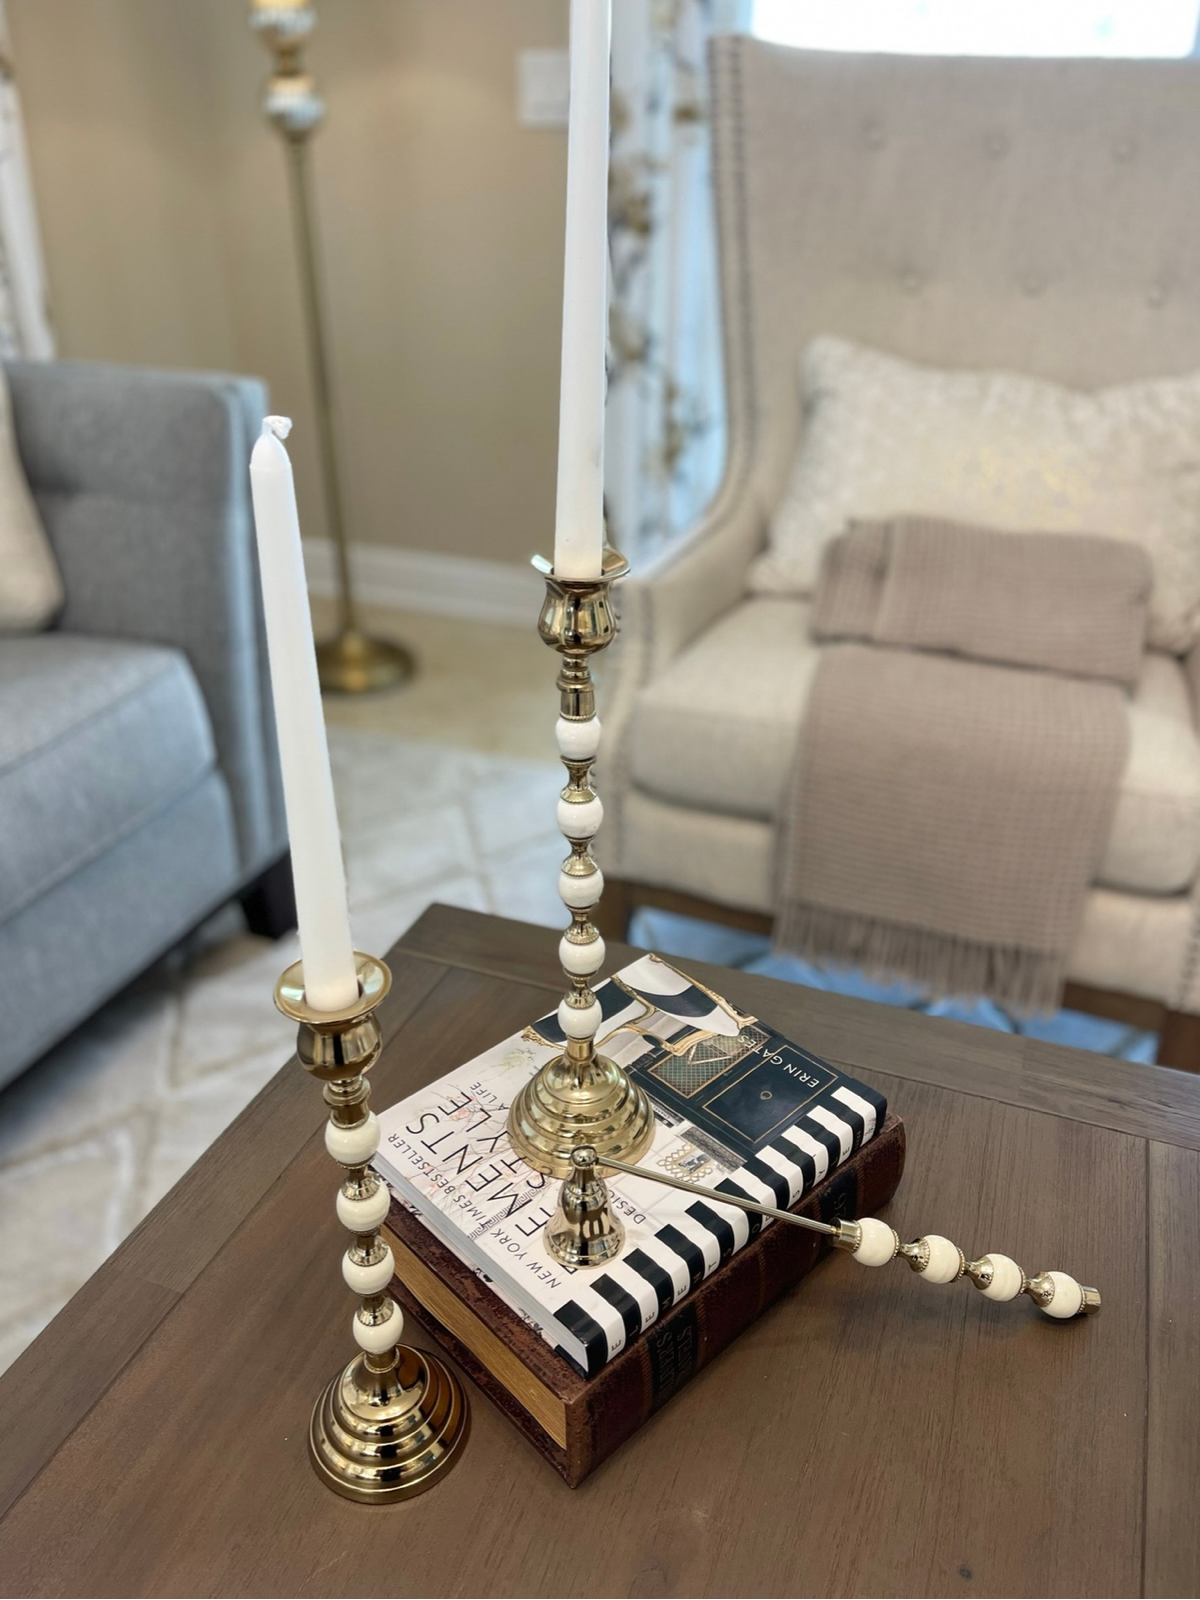 10H Gold Stainless Steel Candle Holder with White Ceramic Beaded Design Stem. Sold by KYA Home Decor.